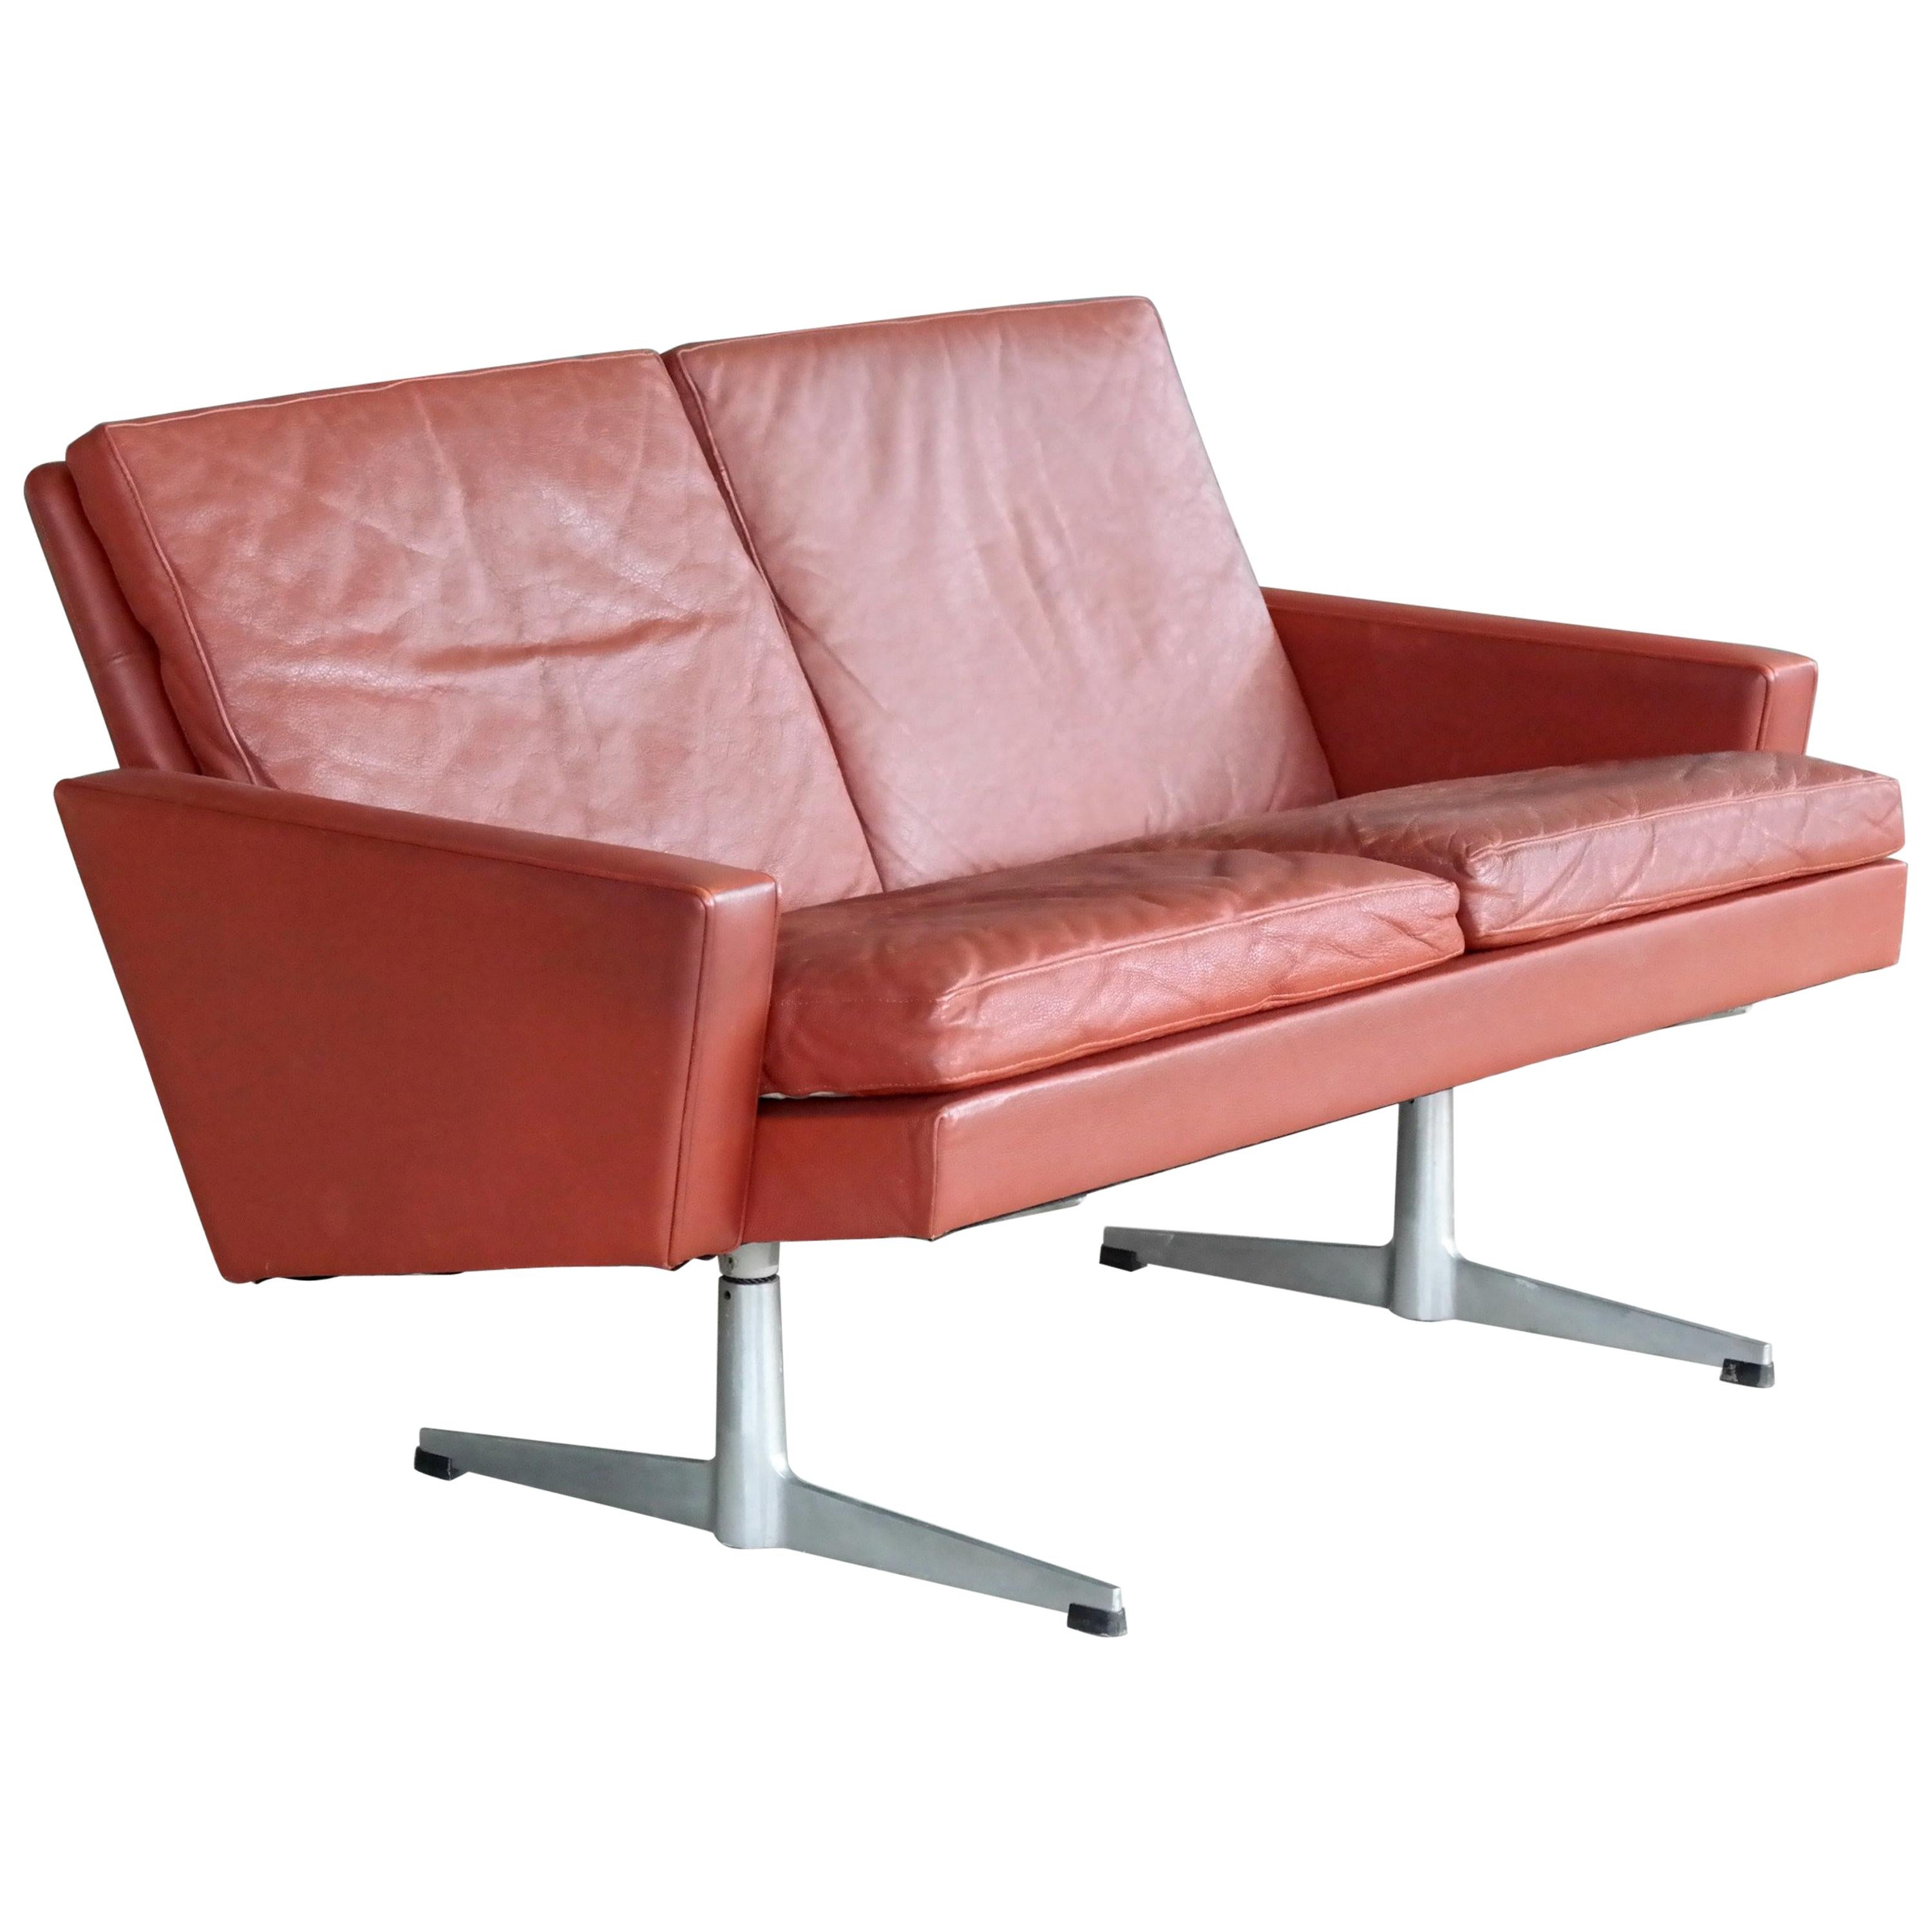 Danish 1960s Two-Seat Airport Sofa in Red Leather